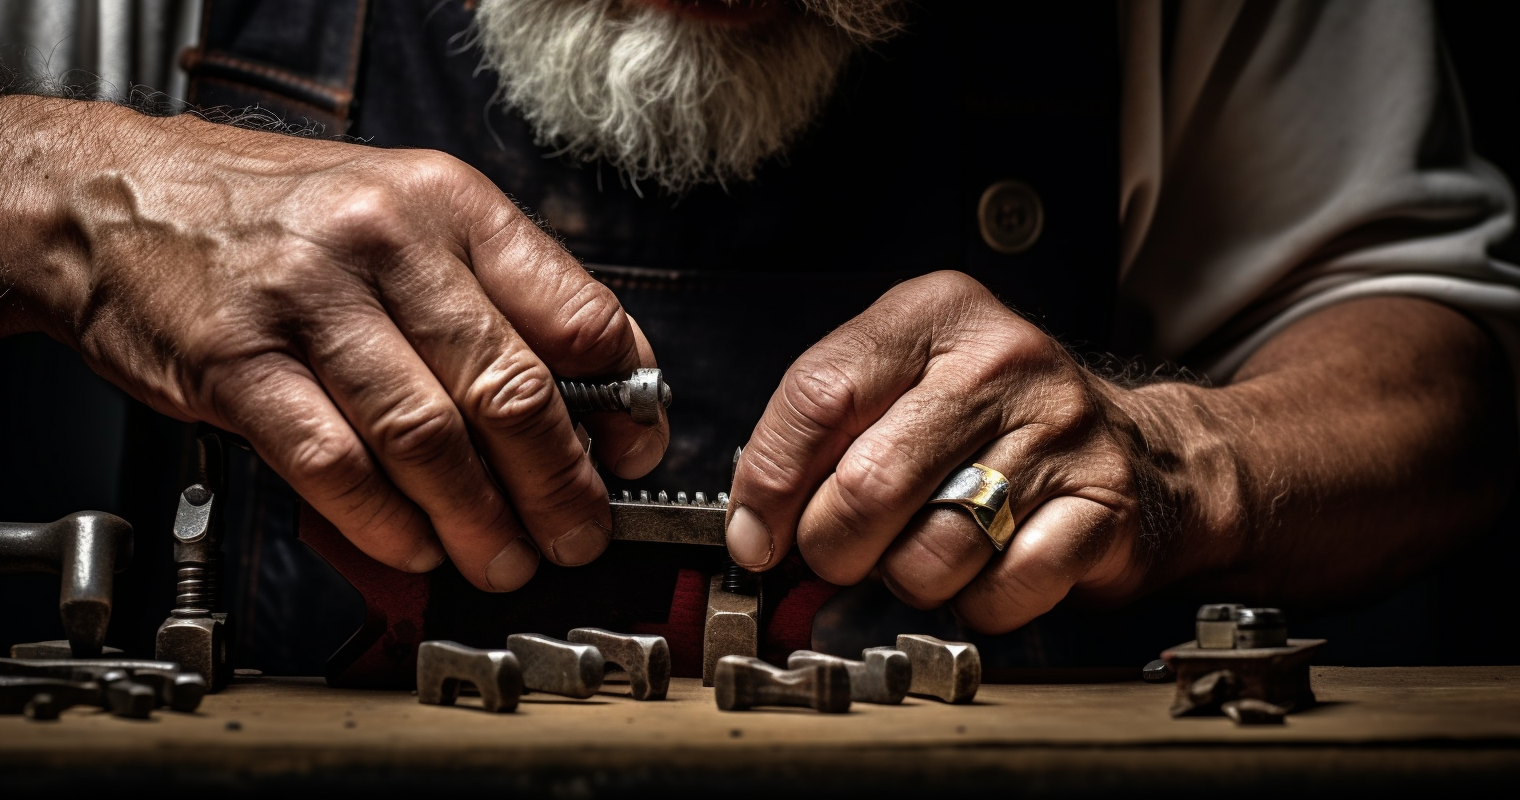 An intriguing shot of a skilled craftsman's hands